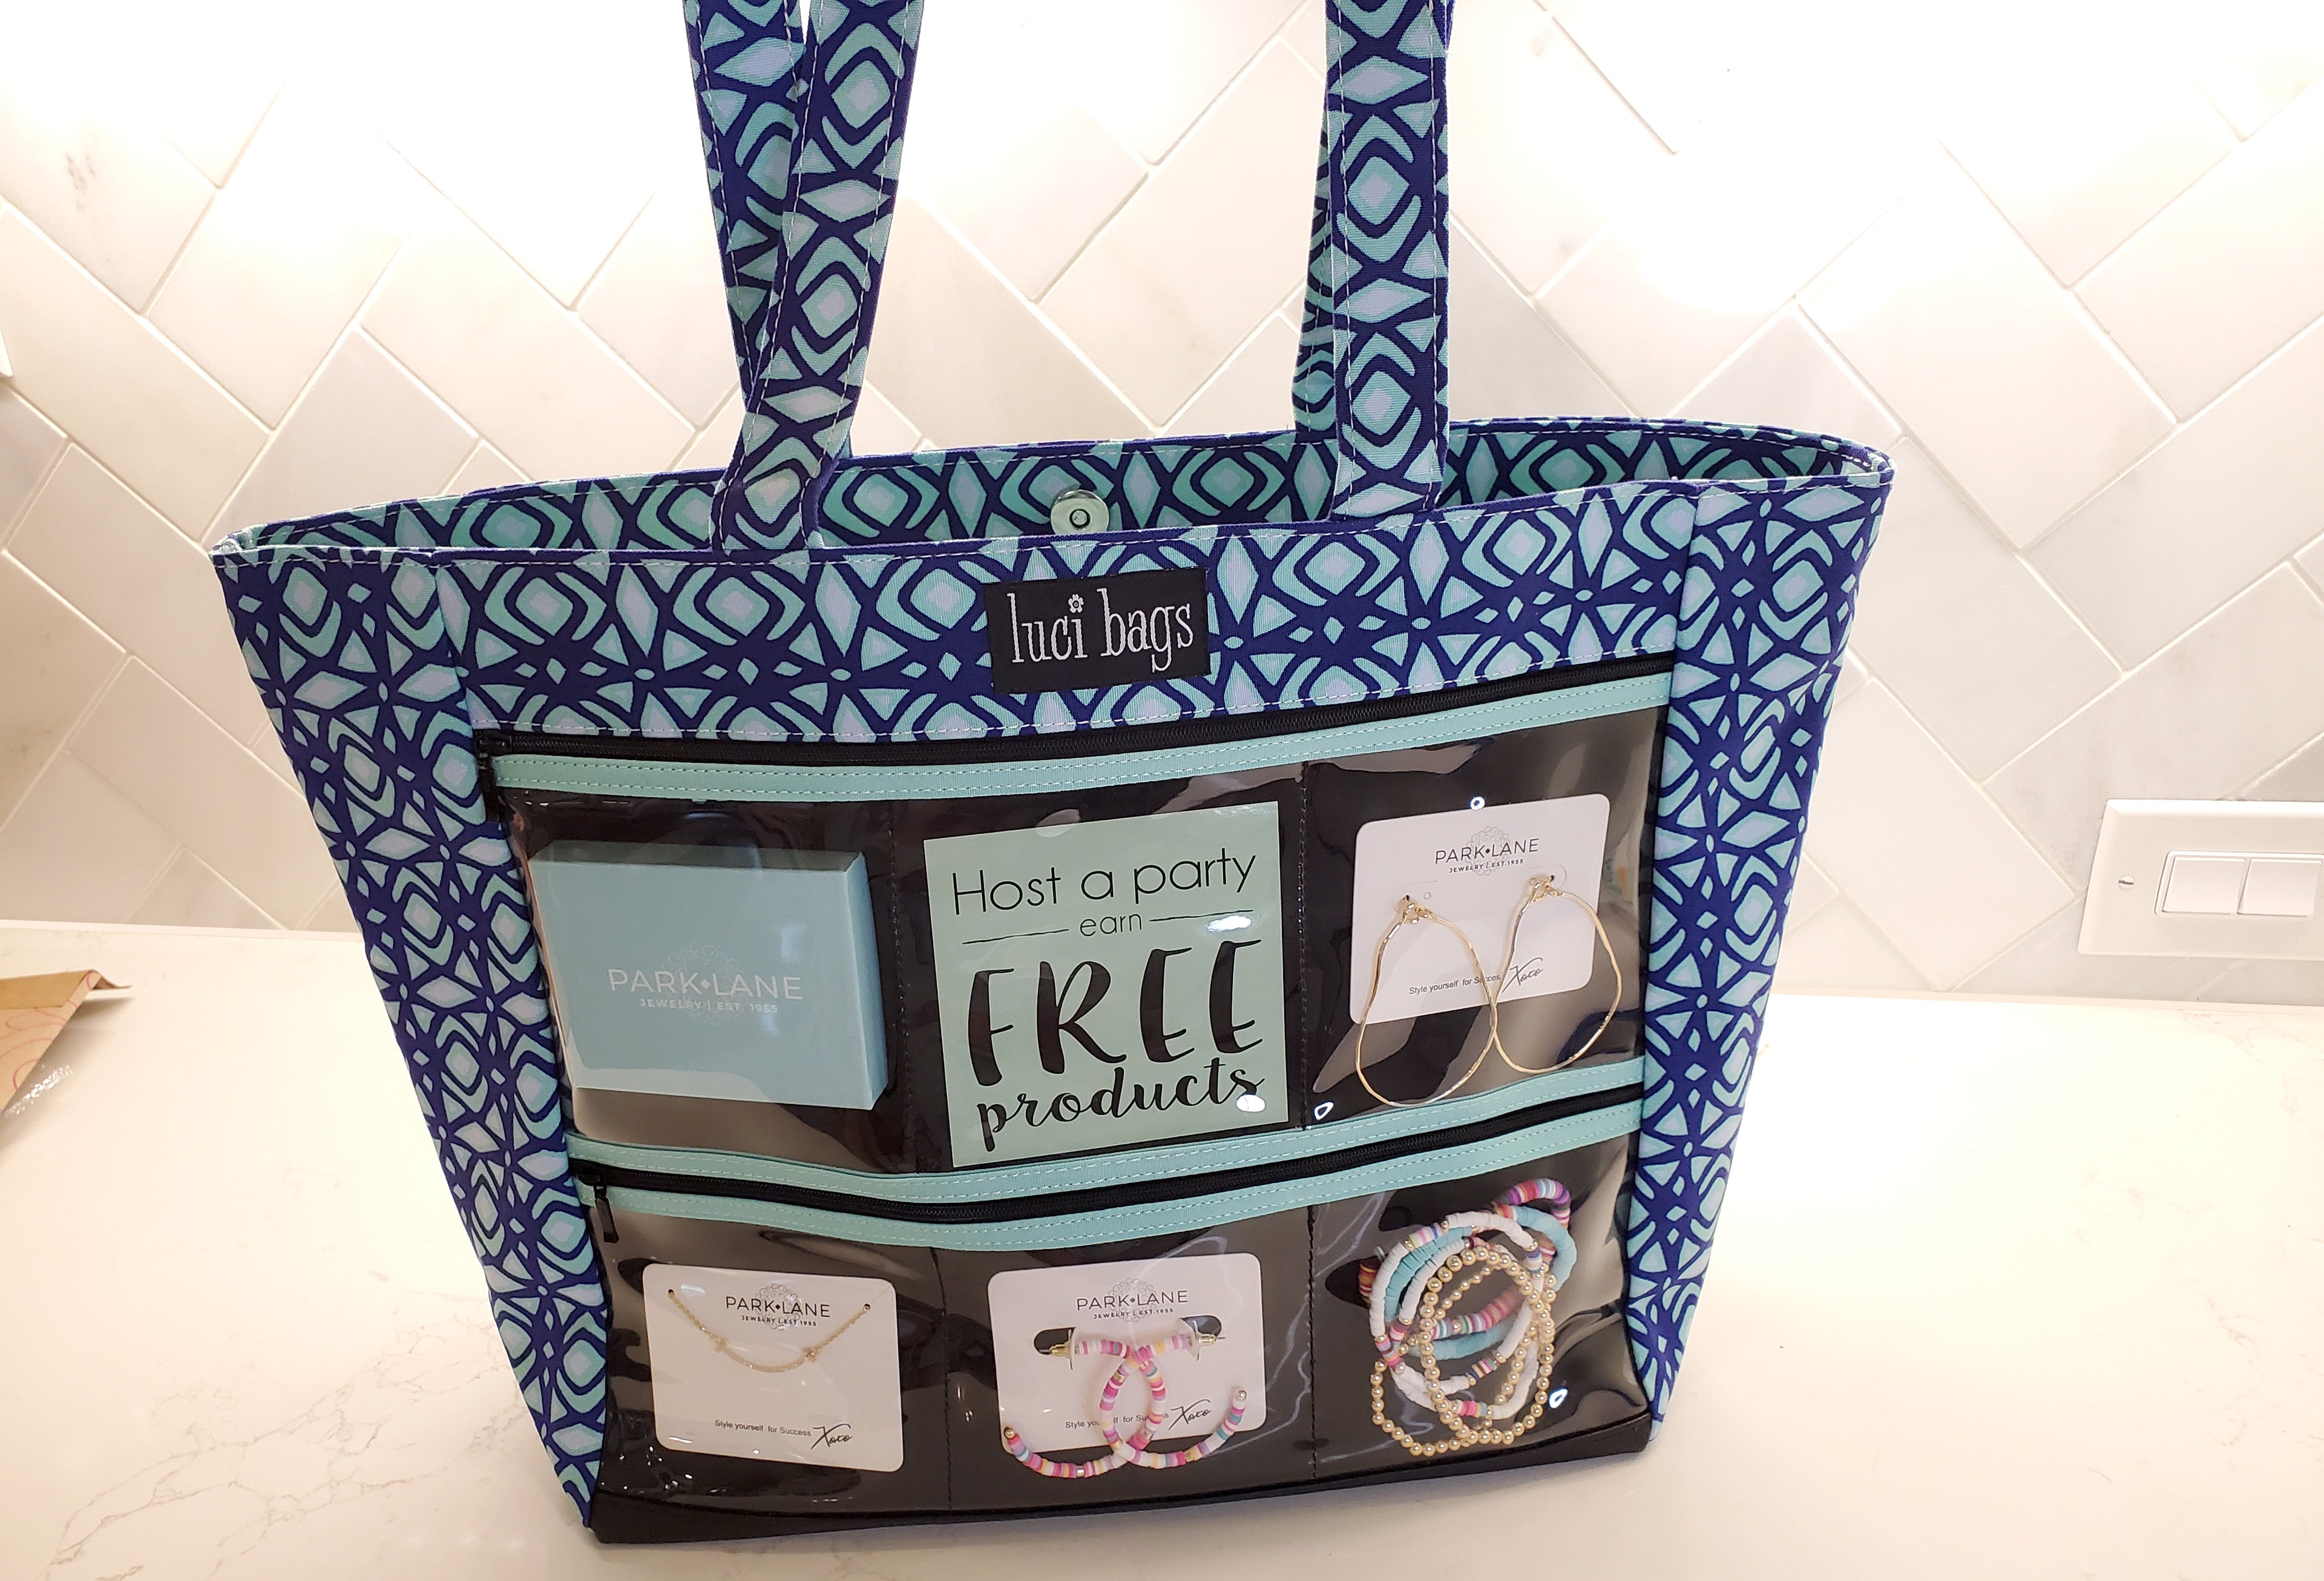 Load video: Video showing how to display jewelry in a Calypso Large Luci Bag Display Tote.